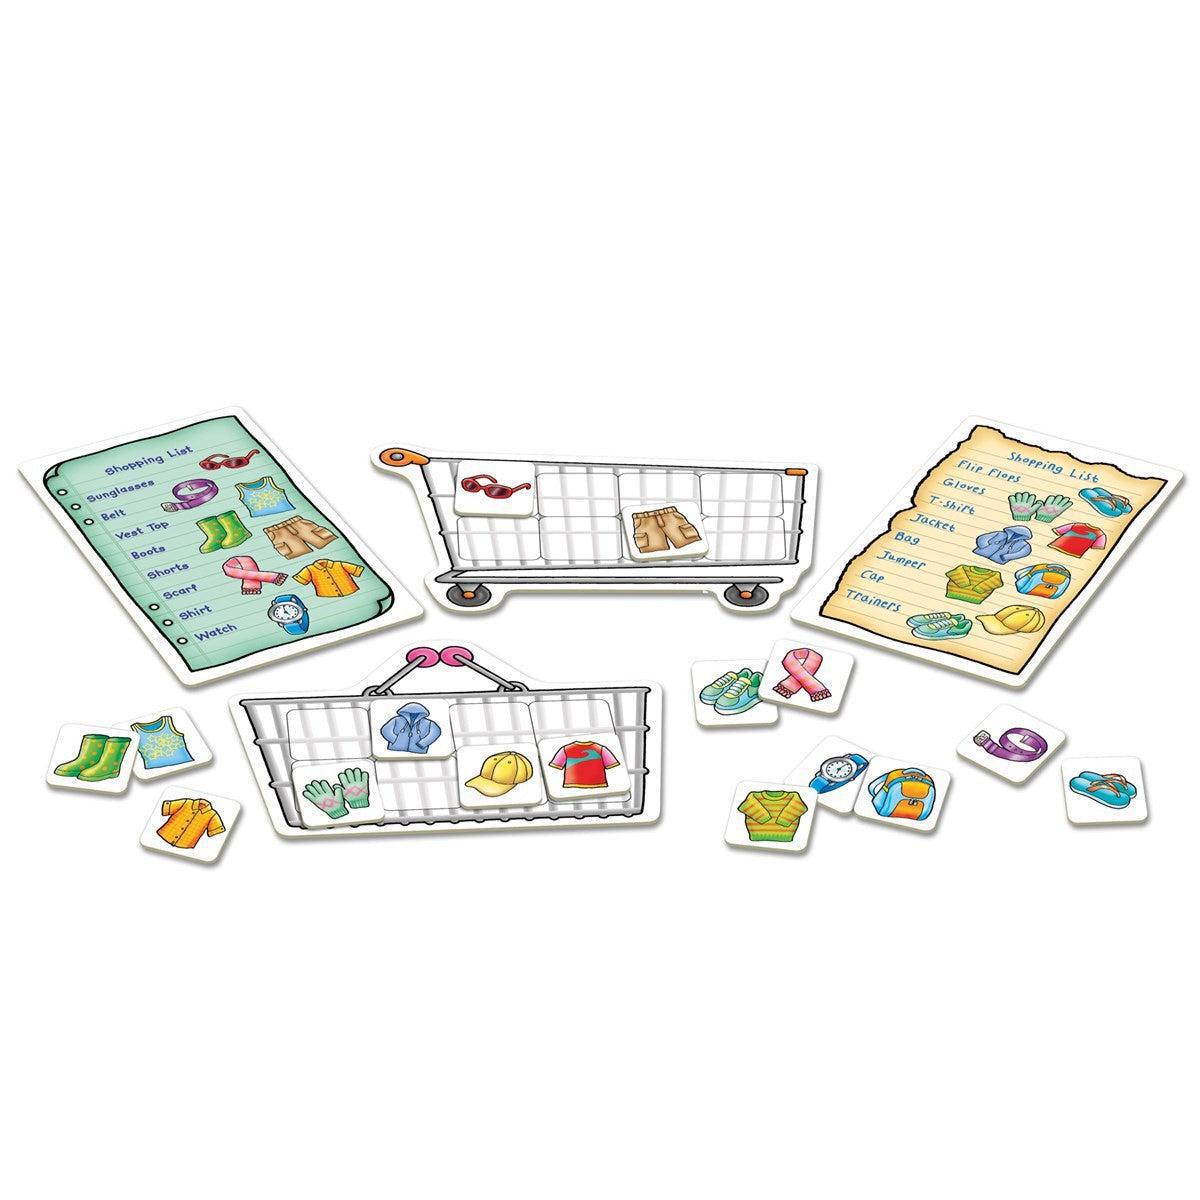 Orchard Toys Shopping List Extra - Clothes